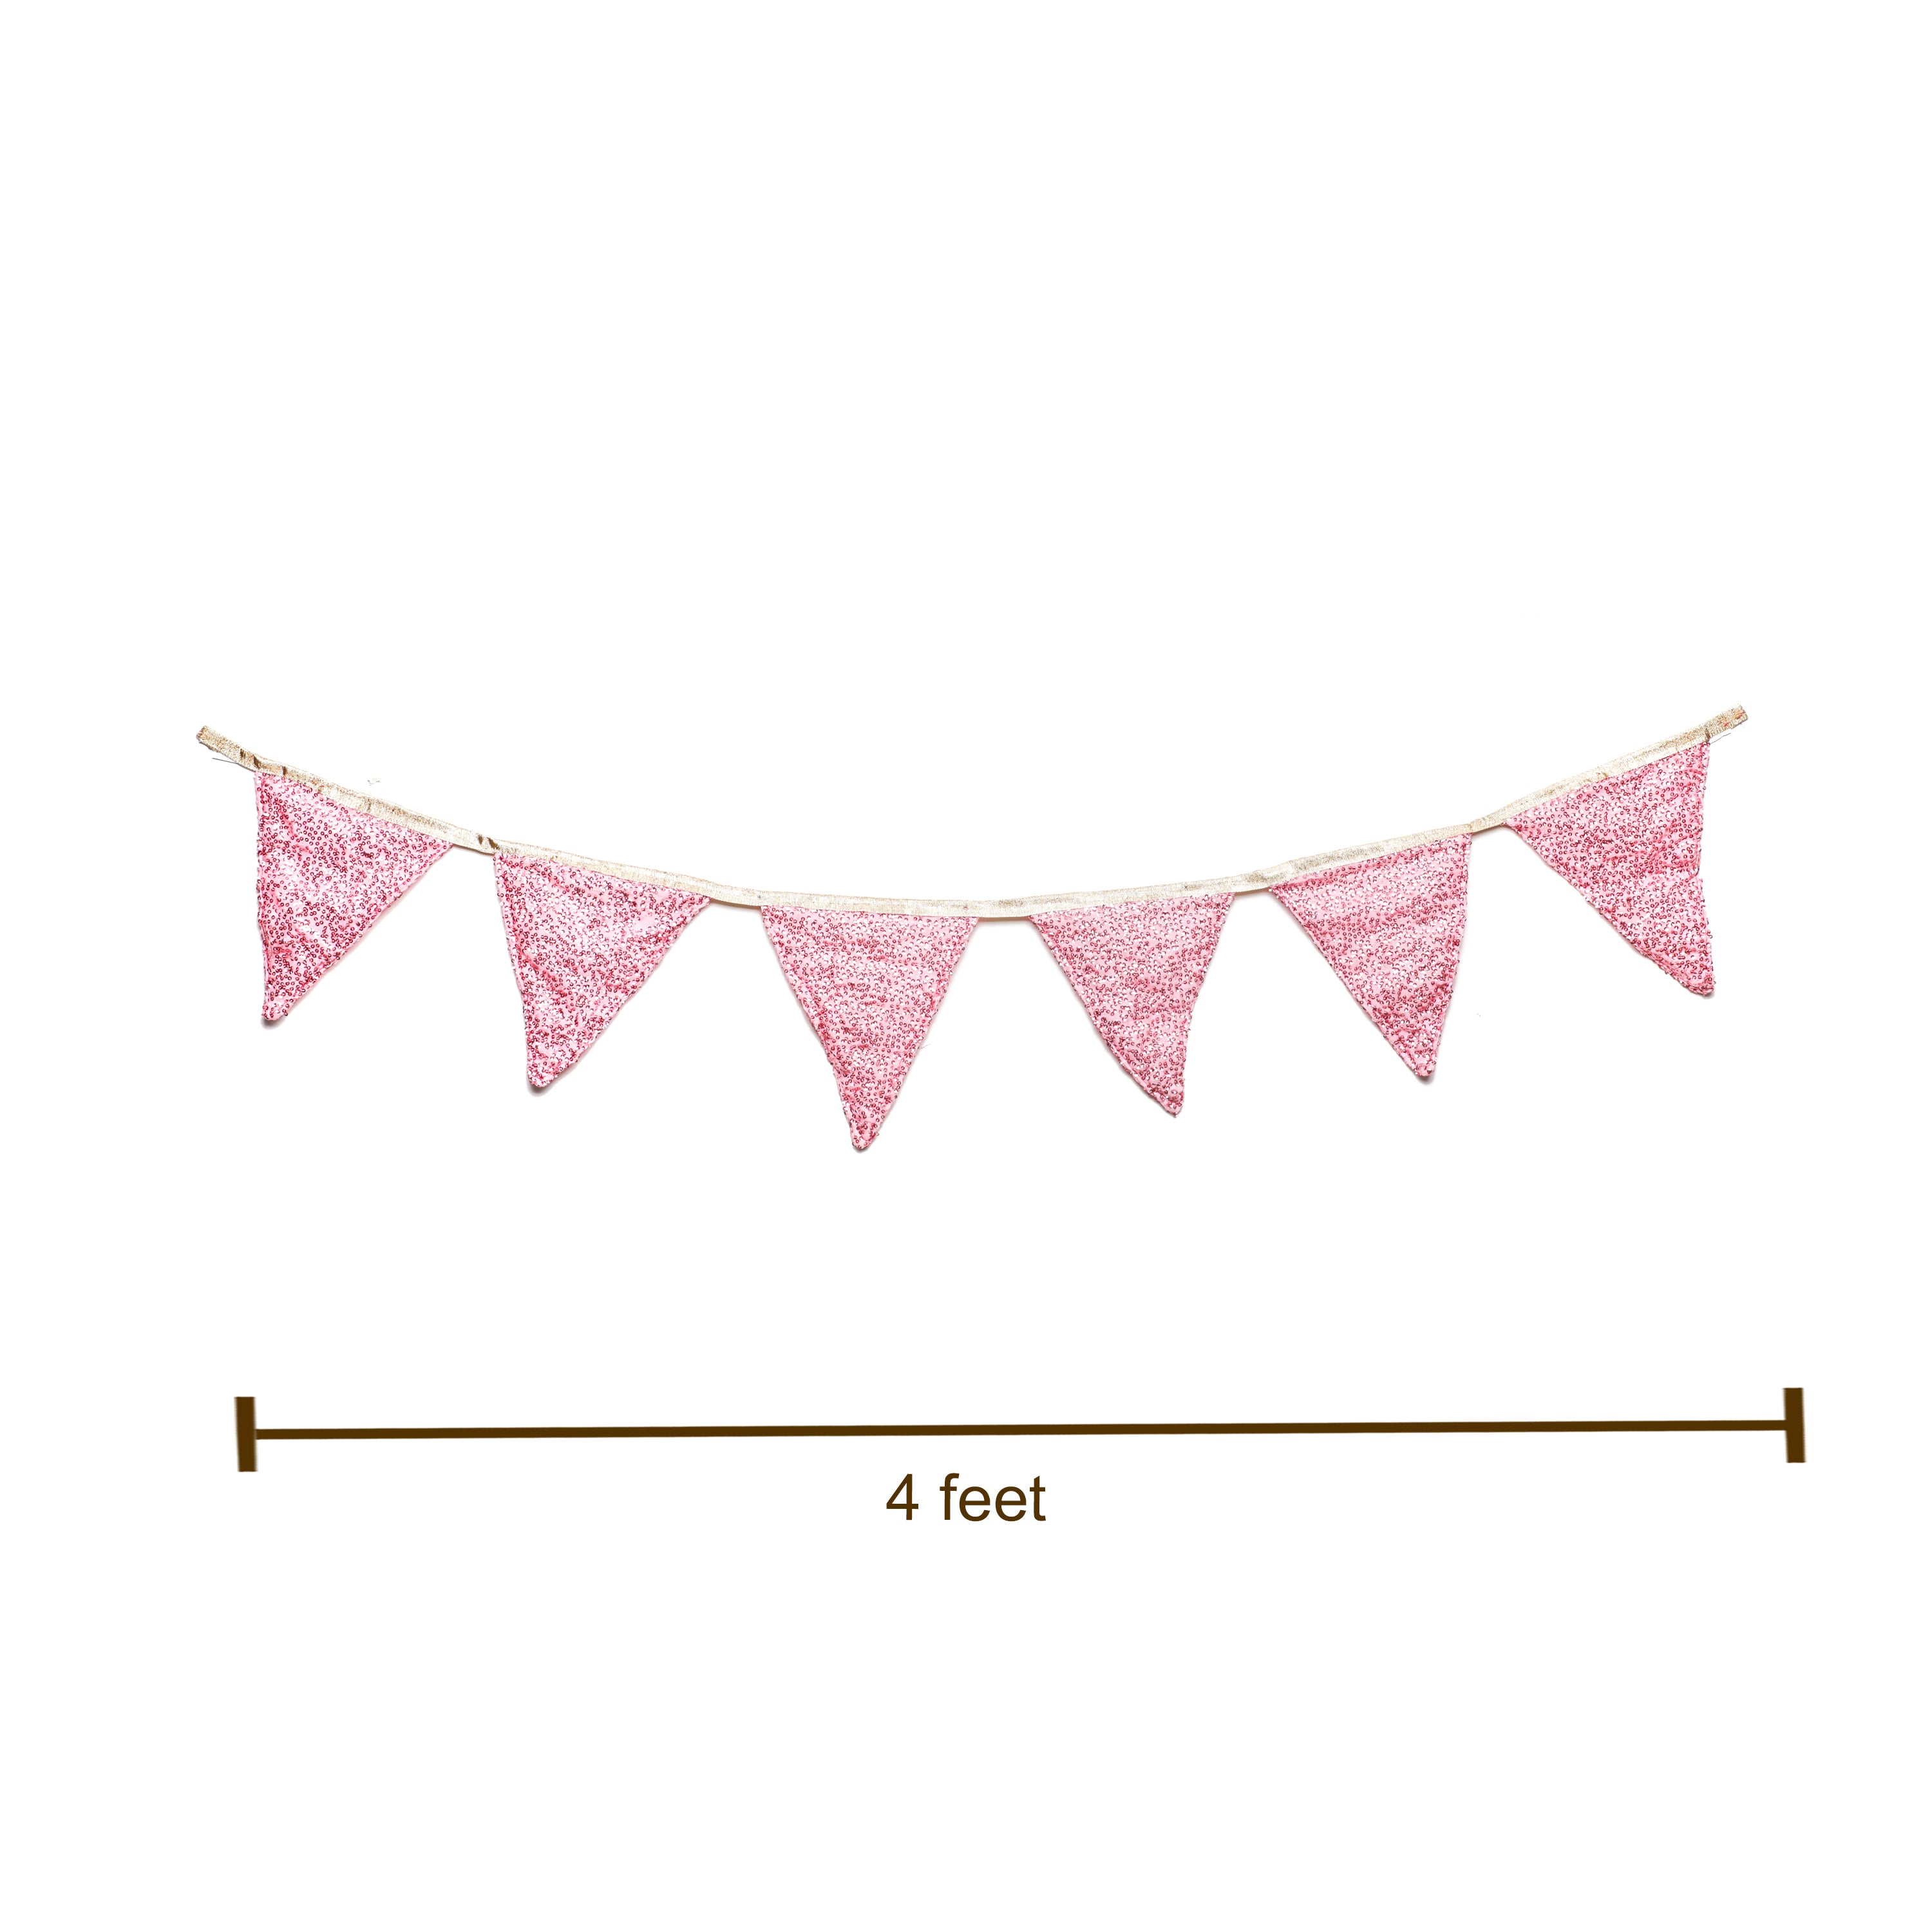 Fabric bunting flag banner